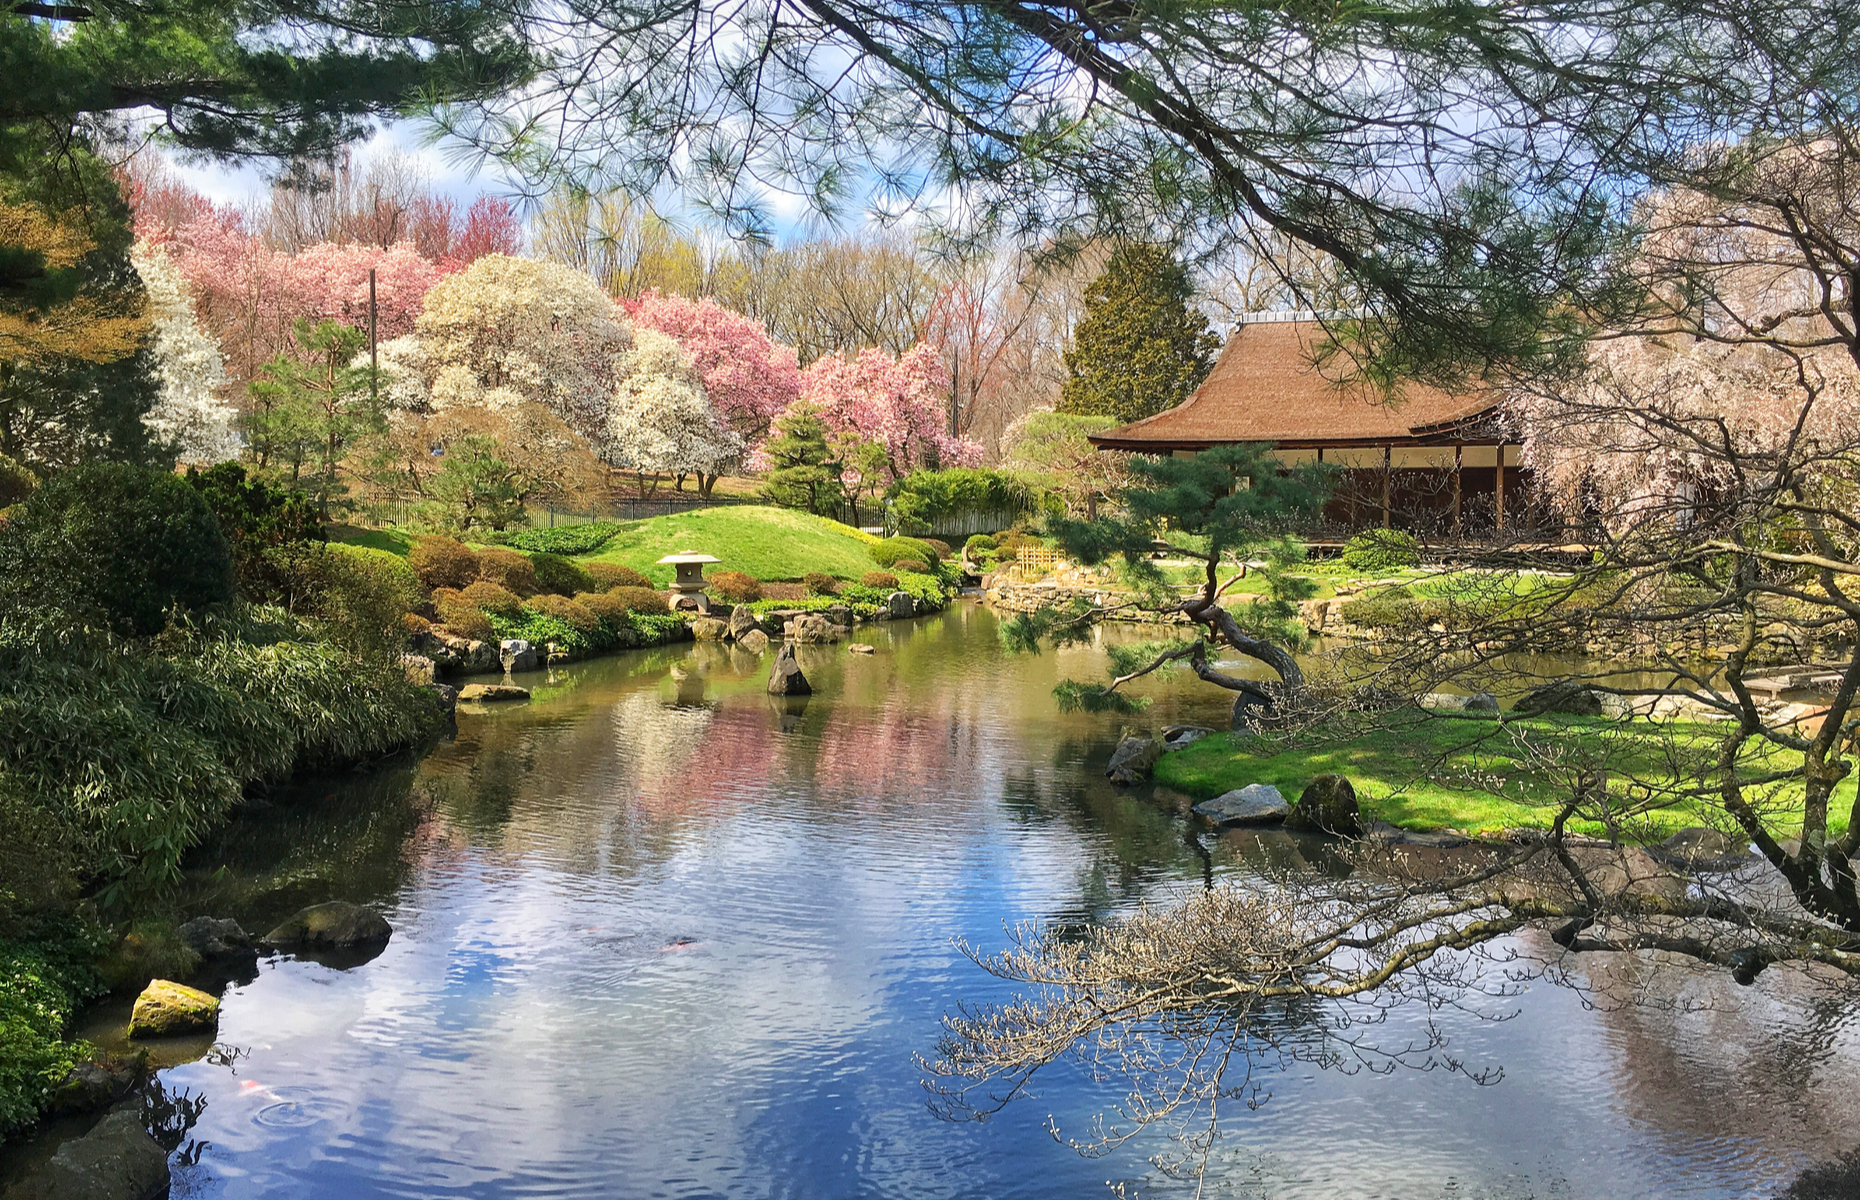 <p class="p1"><span>You might be surprised to learn that one of the country’s most beautiful Japanese gardens is located in Philadelphia. The <a href="http://japanphilly.org/shofuso/" rel="noreferrer noopener"><span>Shofuso Japanese House and Garden</span></a> was built in Japan in 1953 by renowned Japanese architect Junzō Yoshimura and sent to New York’s Museum of Modern Art before settling into West Fairmount Park in 1958. </span></p>